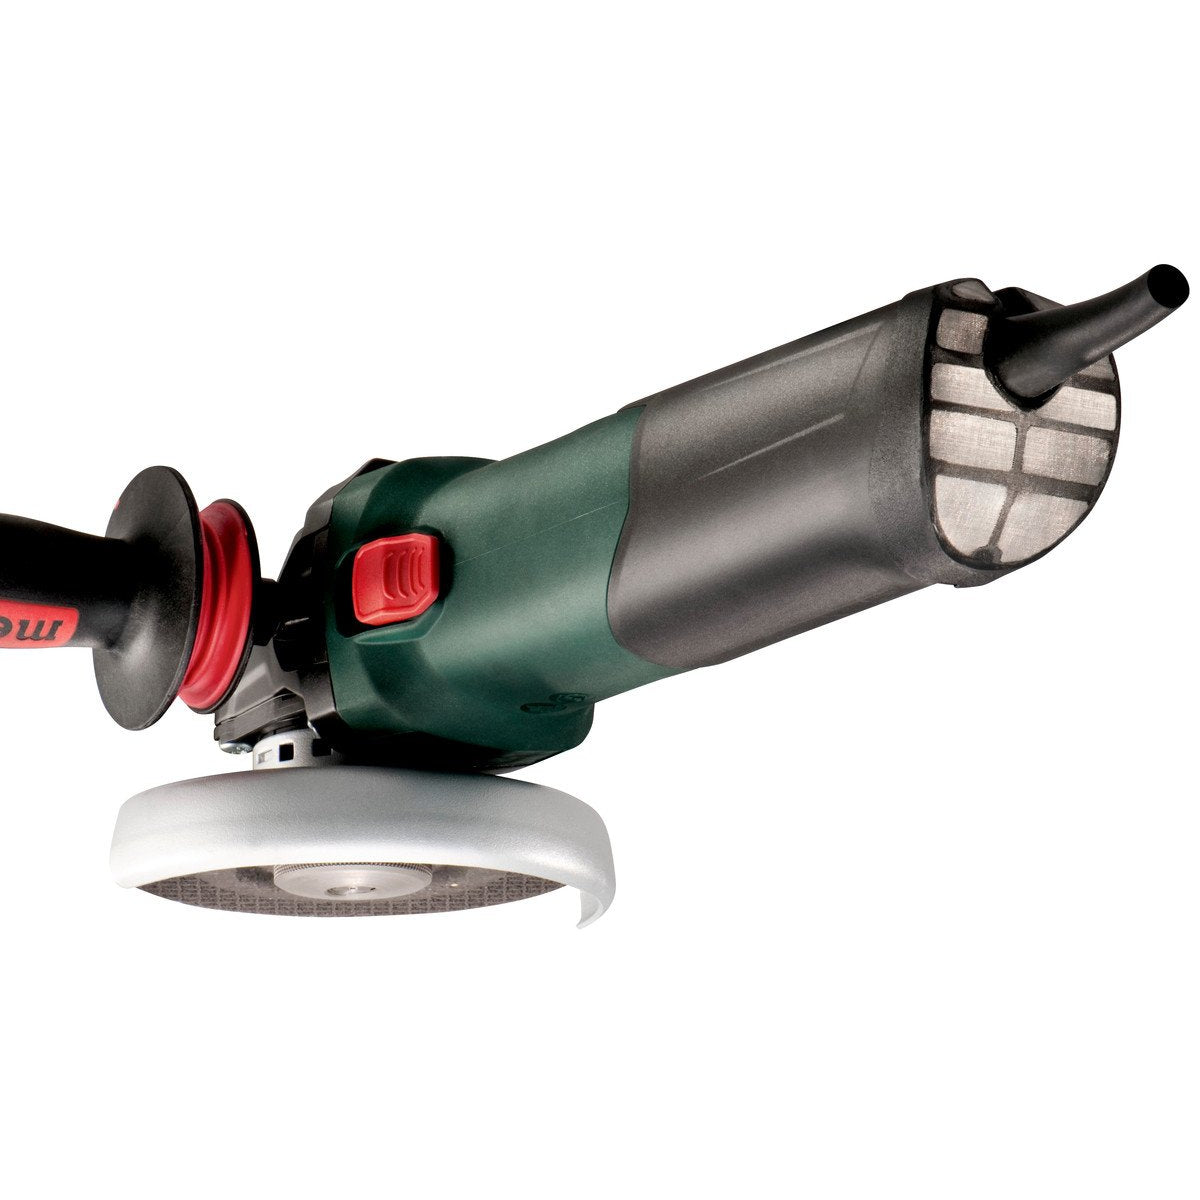 Metabo WE 15-150 6" Quick Angle Grinder - 600464420